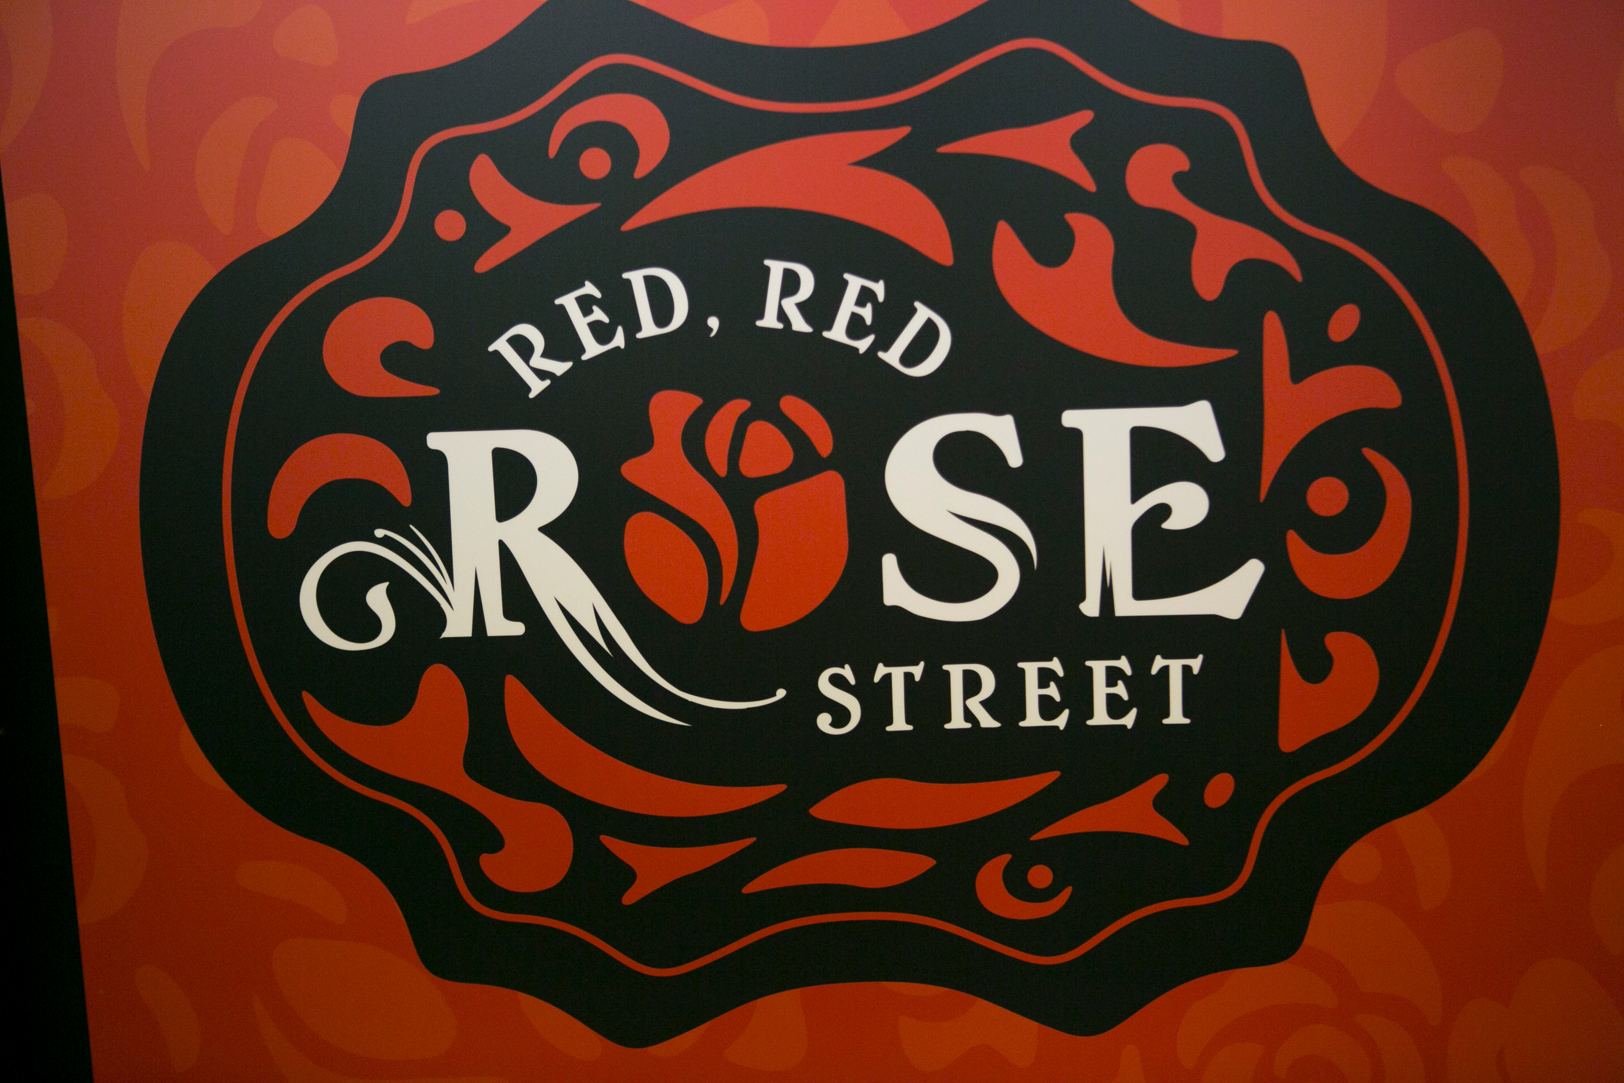 Red, Red Rose Street